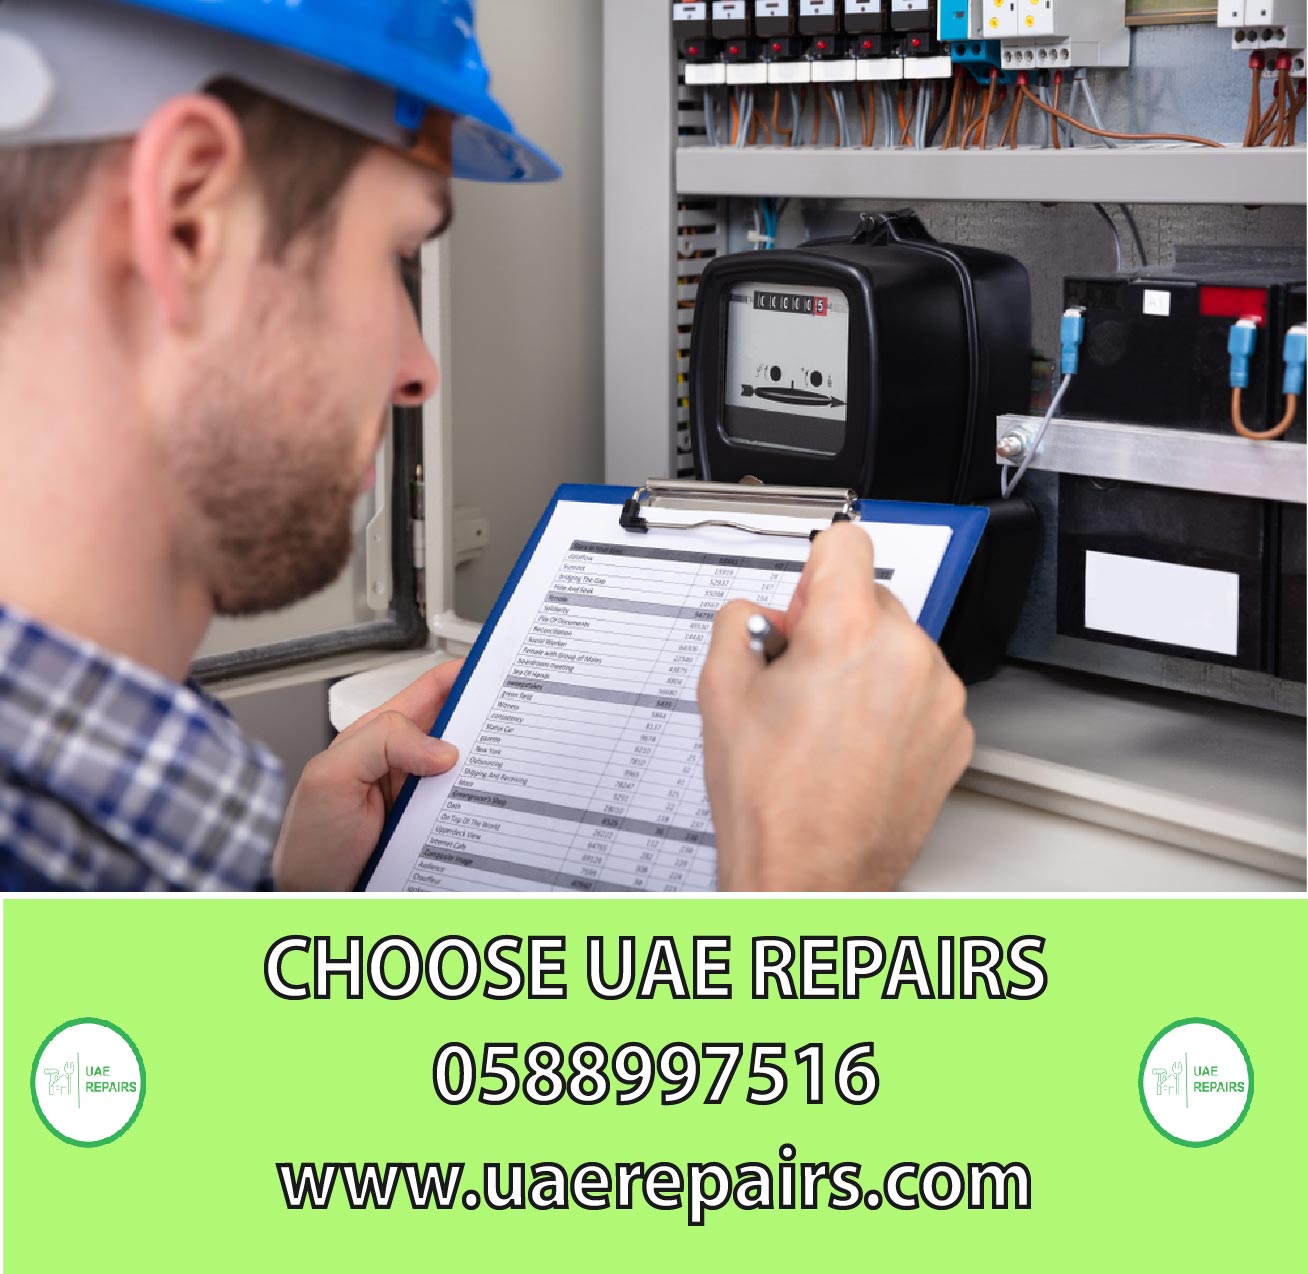 CHOOSE UAE REPAIRS FOR ELECTRICIAN SERVICE UAE CONTACT US 0588997516